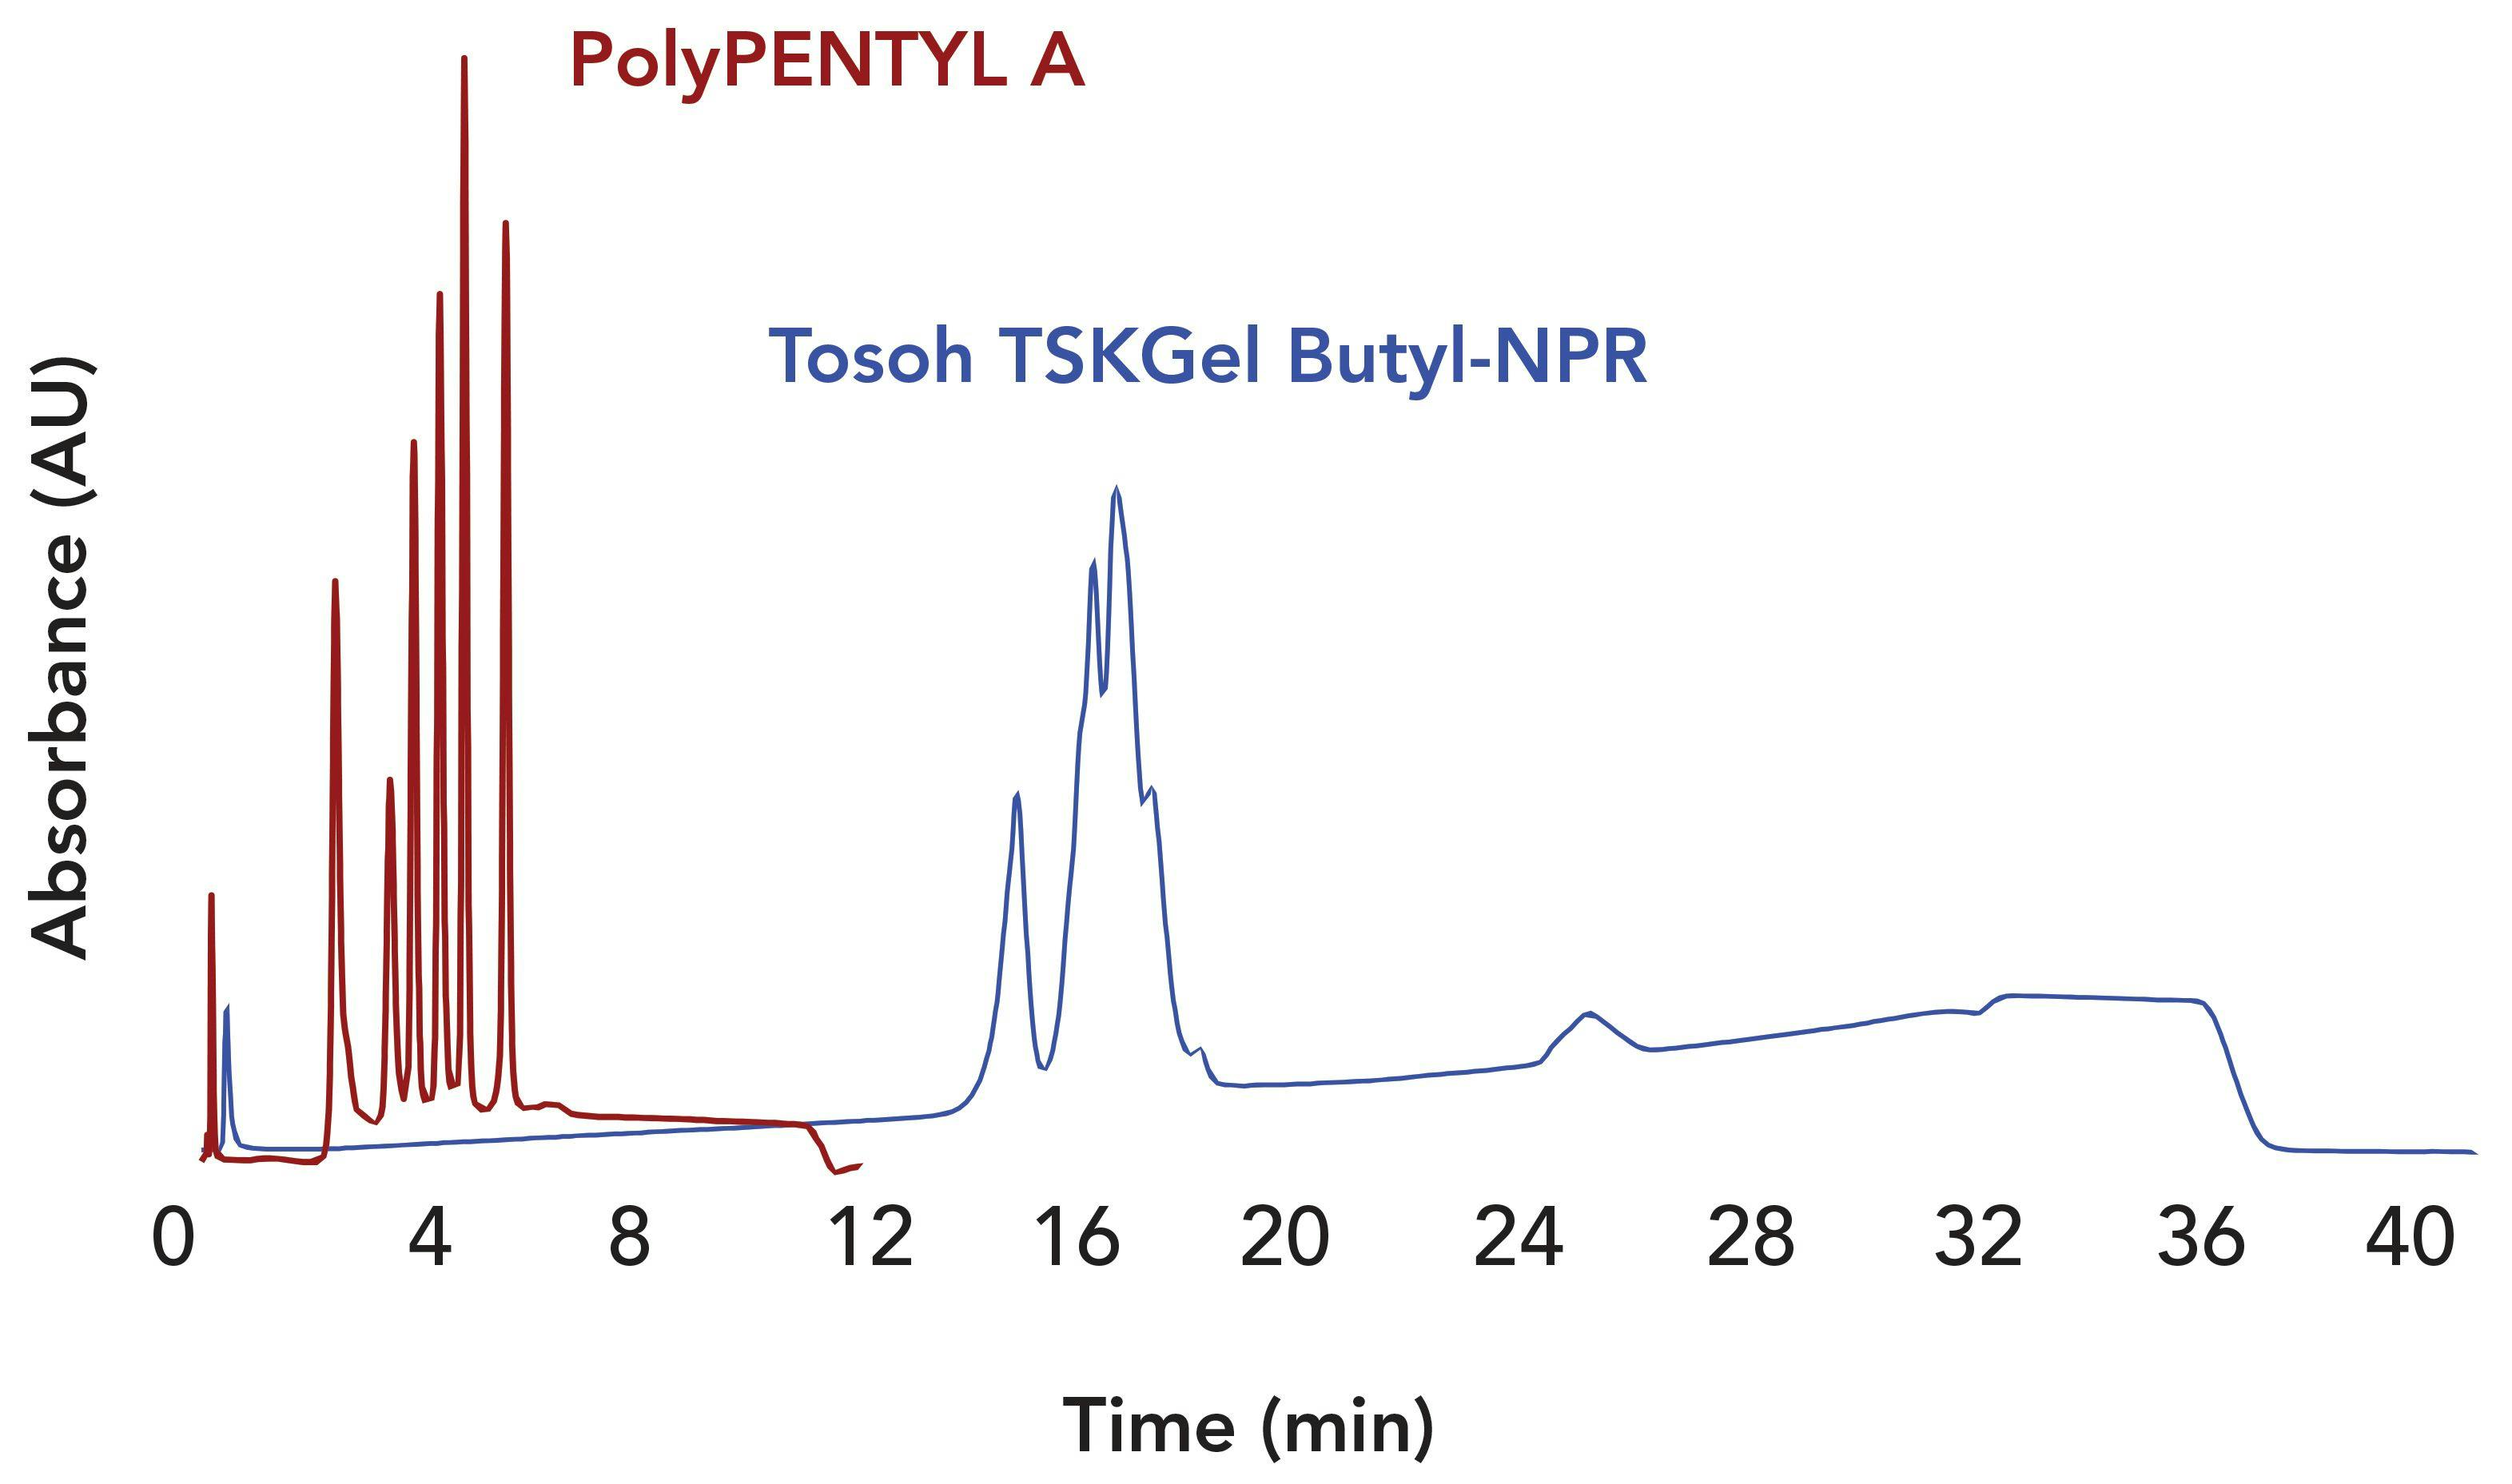 FIGURE 4: Comparison of the separation of a mixture of six antibodies. Temperature: Ambient. PolyPENTYL A column: 50 x 2.1-mm, 3-μm, 1000-Å pore diameter. Mobile phase A:1 M ammonium acetate, pH 7.0. Mobile phase B: 20 mM ammonium acetate with 50% acetonitrile, pH 7.0. Gradient: 10 min, 0–100% B. Flow rate: 1 mL/min. TSKgel Butyl-NPR column: 35 x 4.6-mm, 2.5 μm. MP A: 1.5 M ammonium sulfate + 500 mM arginine + 20 mM Na-phosphate, pH 7.5. MP B: Same without ammonium sulfate, pH 7.5. Gradient: 45 min, 0–100% B. Flow rate: 0.5 mL/ min. The PolyPENTYL A data was adapted from reference (7). The TSKgel Butyl-NPR data was a personal communication of Madhavi Srikoti, Bristol Myers Squibb, New Brunswick, NJ.